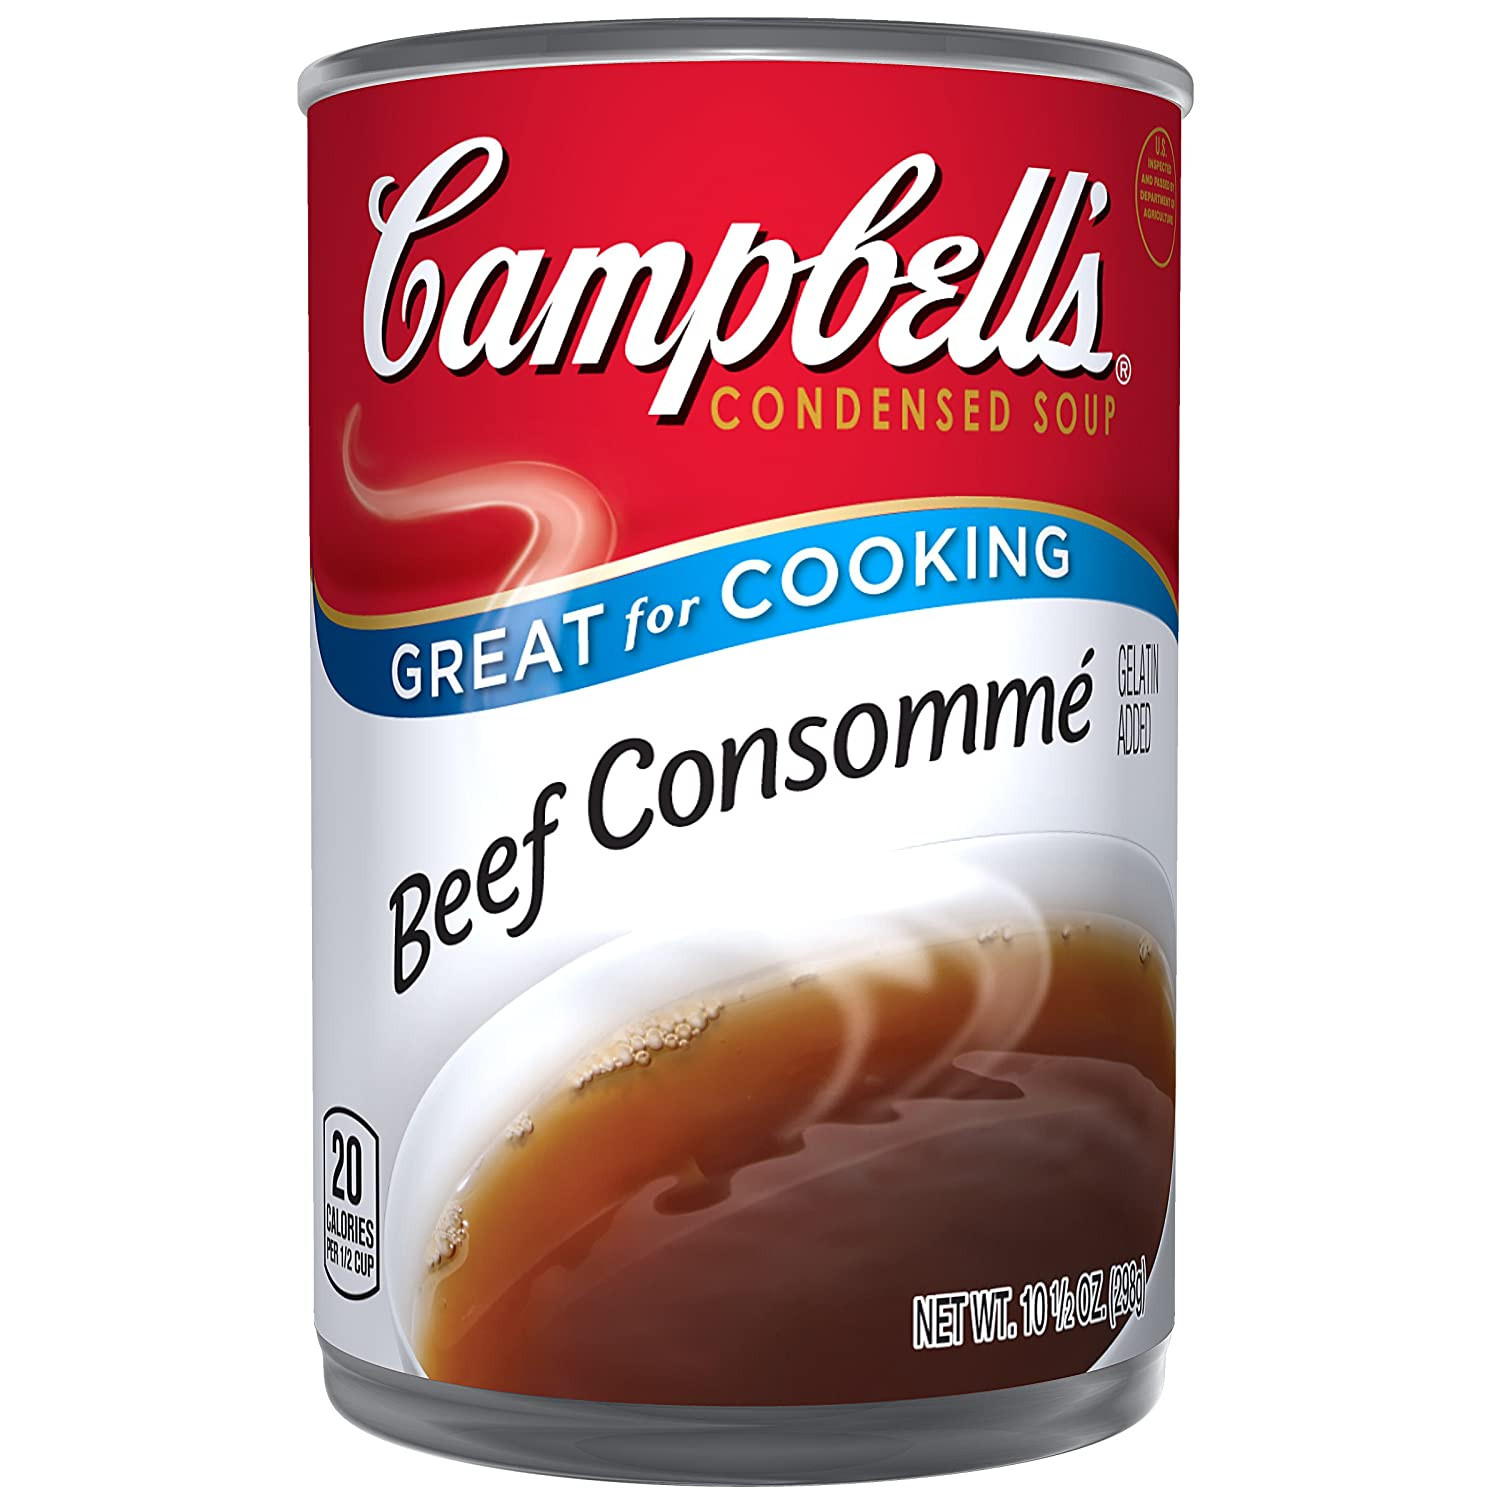 Beef Consomme Soup
 can i use beef consomme instead of beef broth